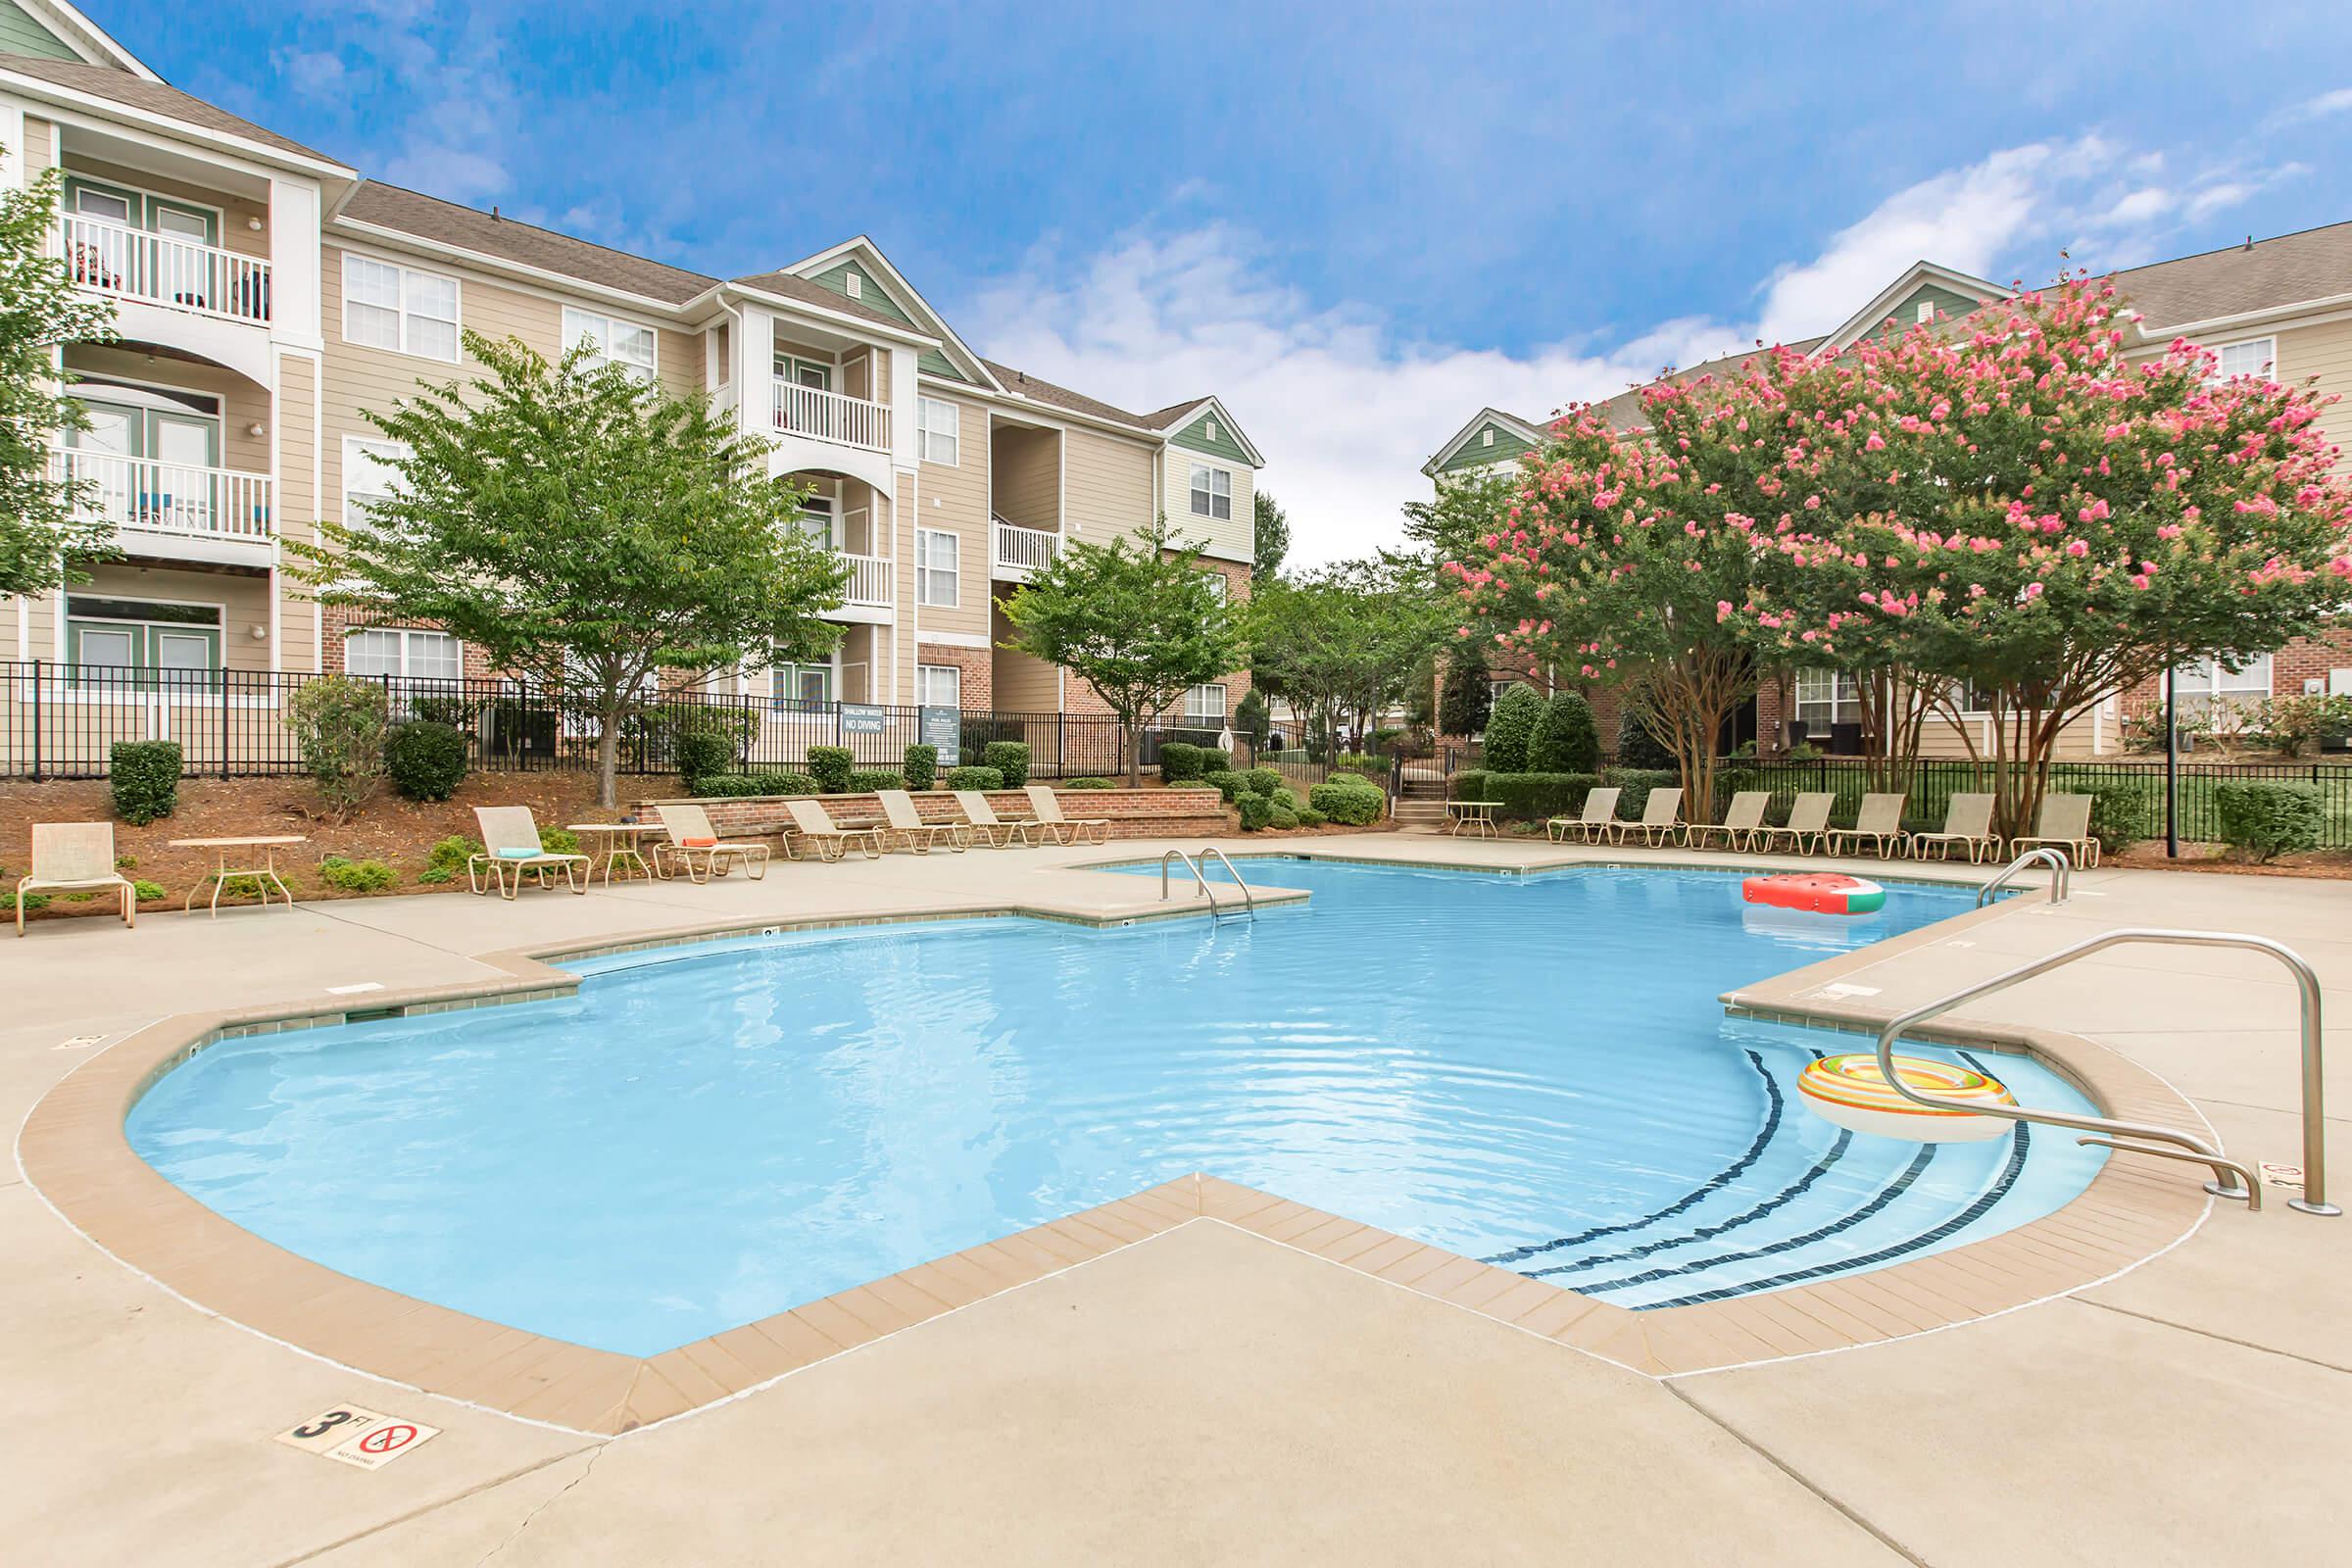 Relax By The Pool In Heather Ridge In Charlotte, NC